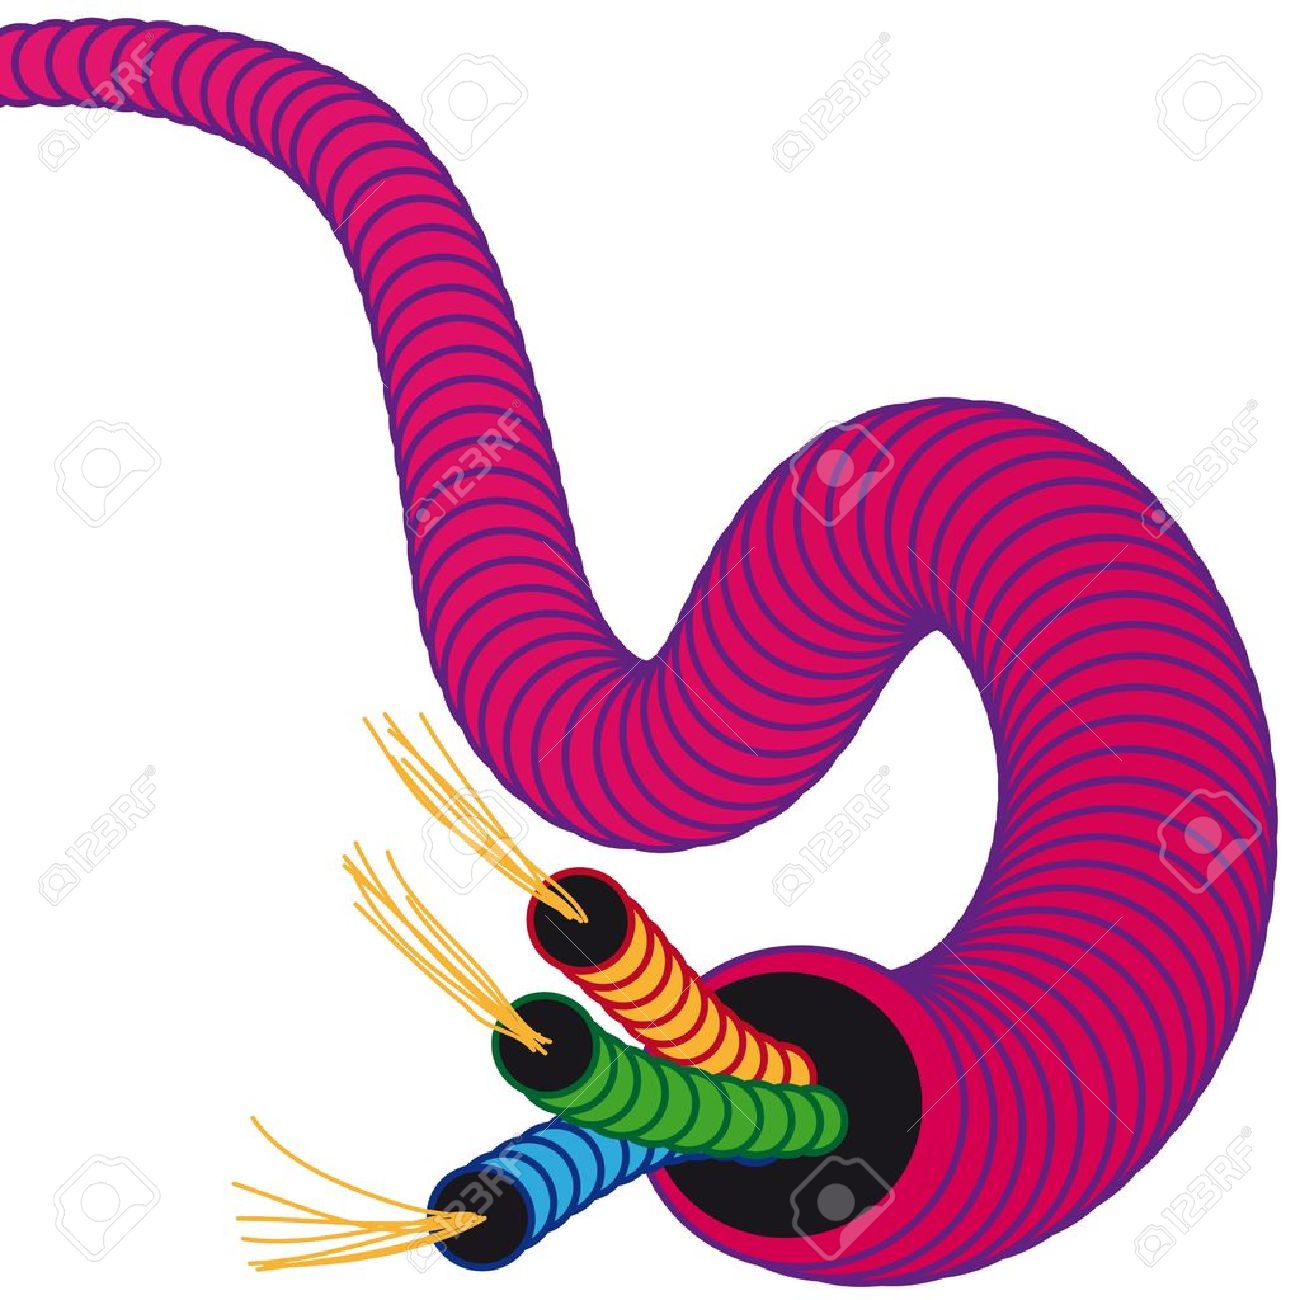 630 Copper Cable Stock Vector Illustration And Royalty Free Copper.